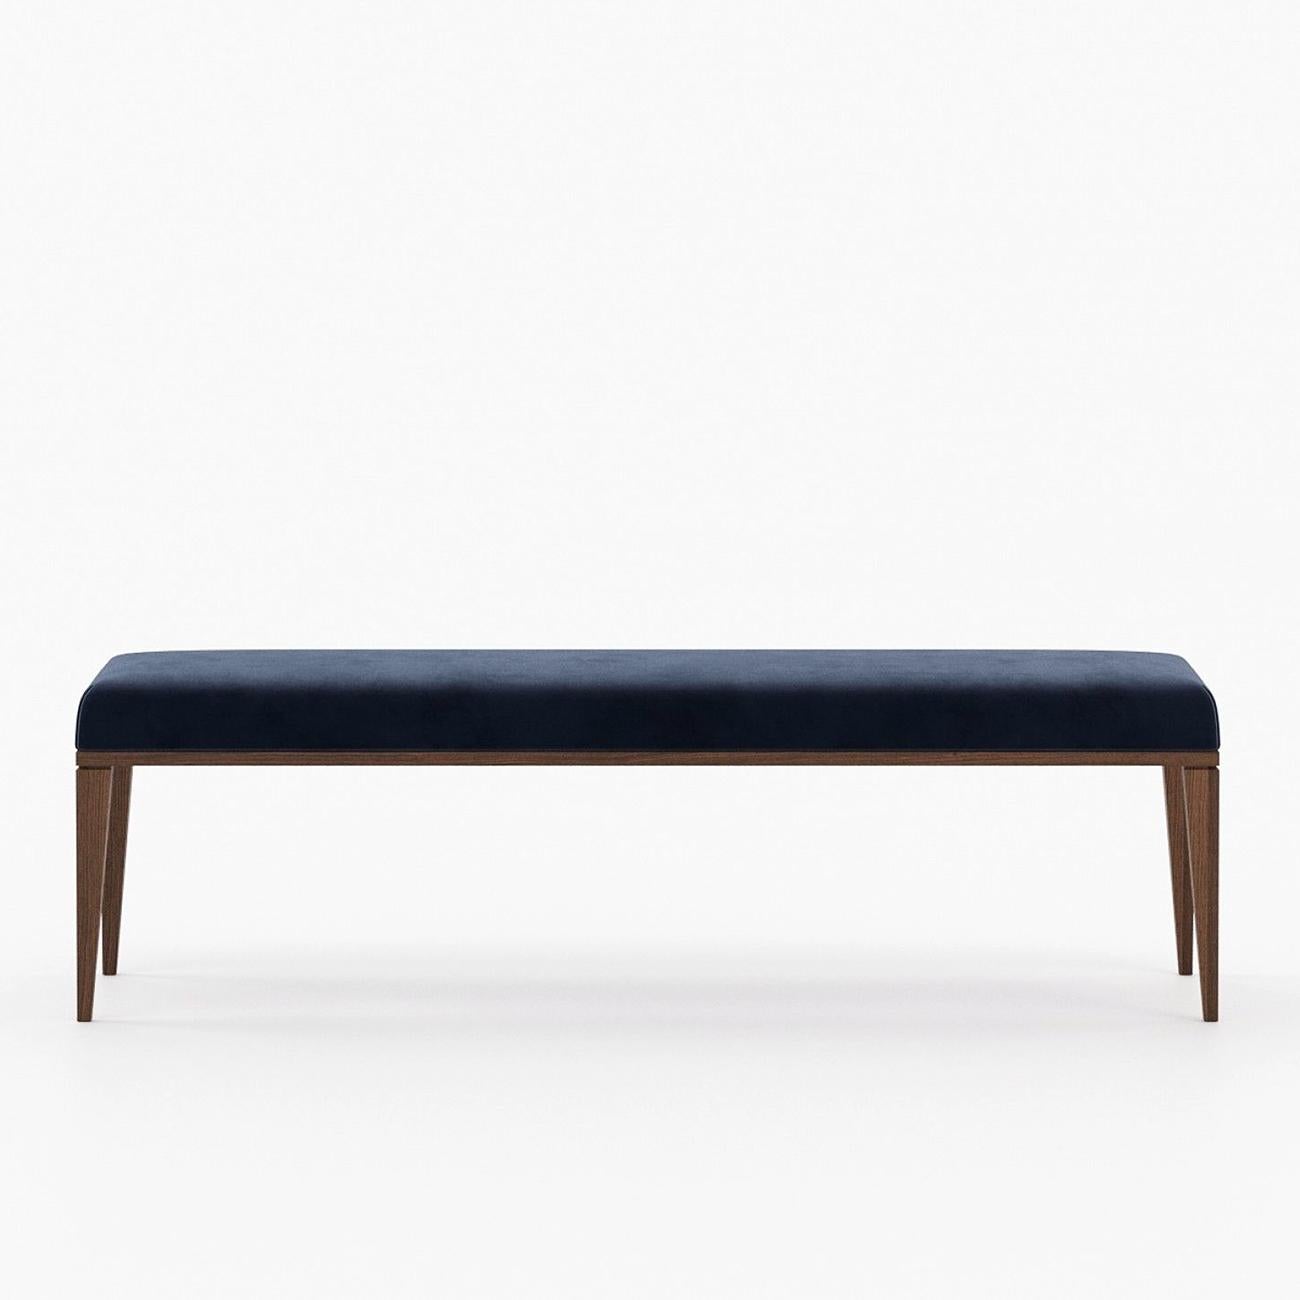 Bench Armando blue with structure in solid walnut,
seat upholstered and covered with blue velvet fabric.
Also available with other fabric colors.